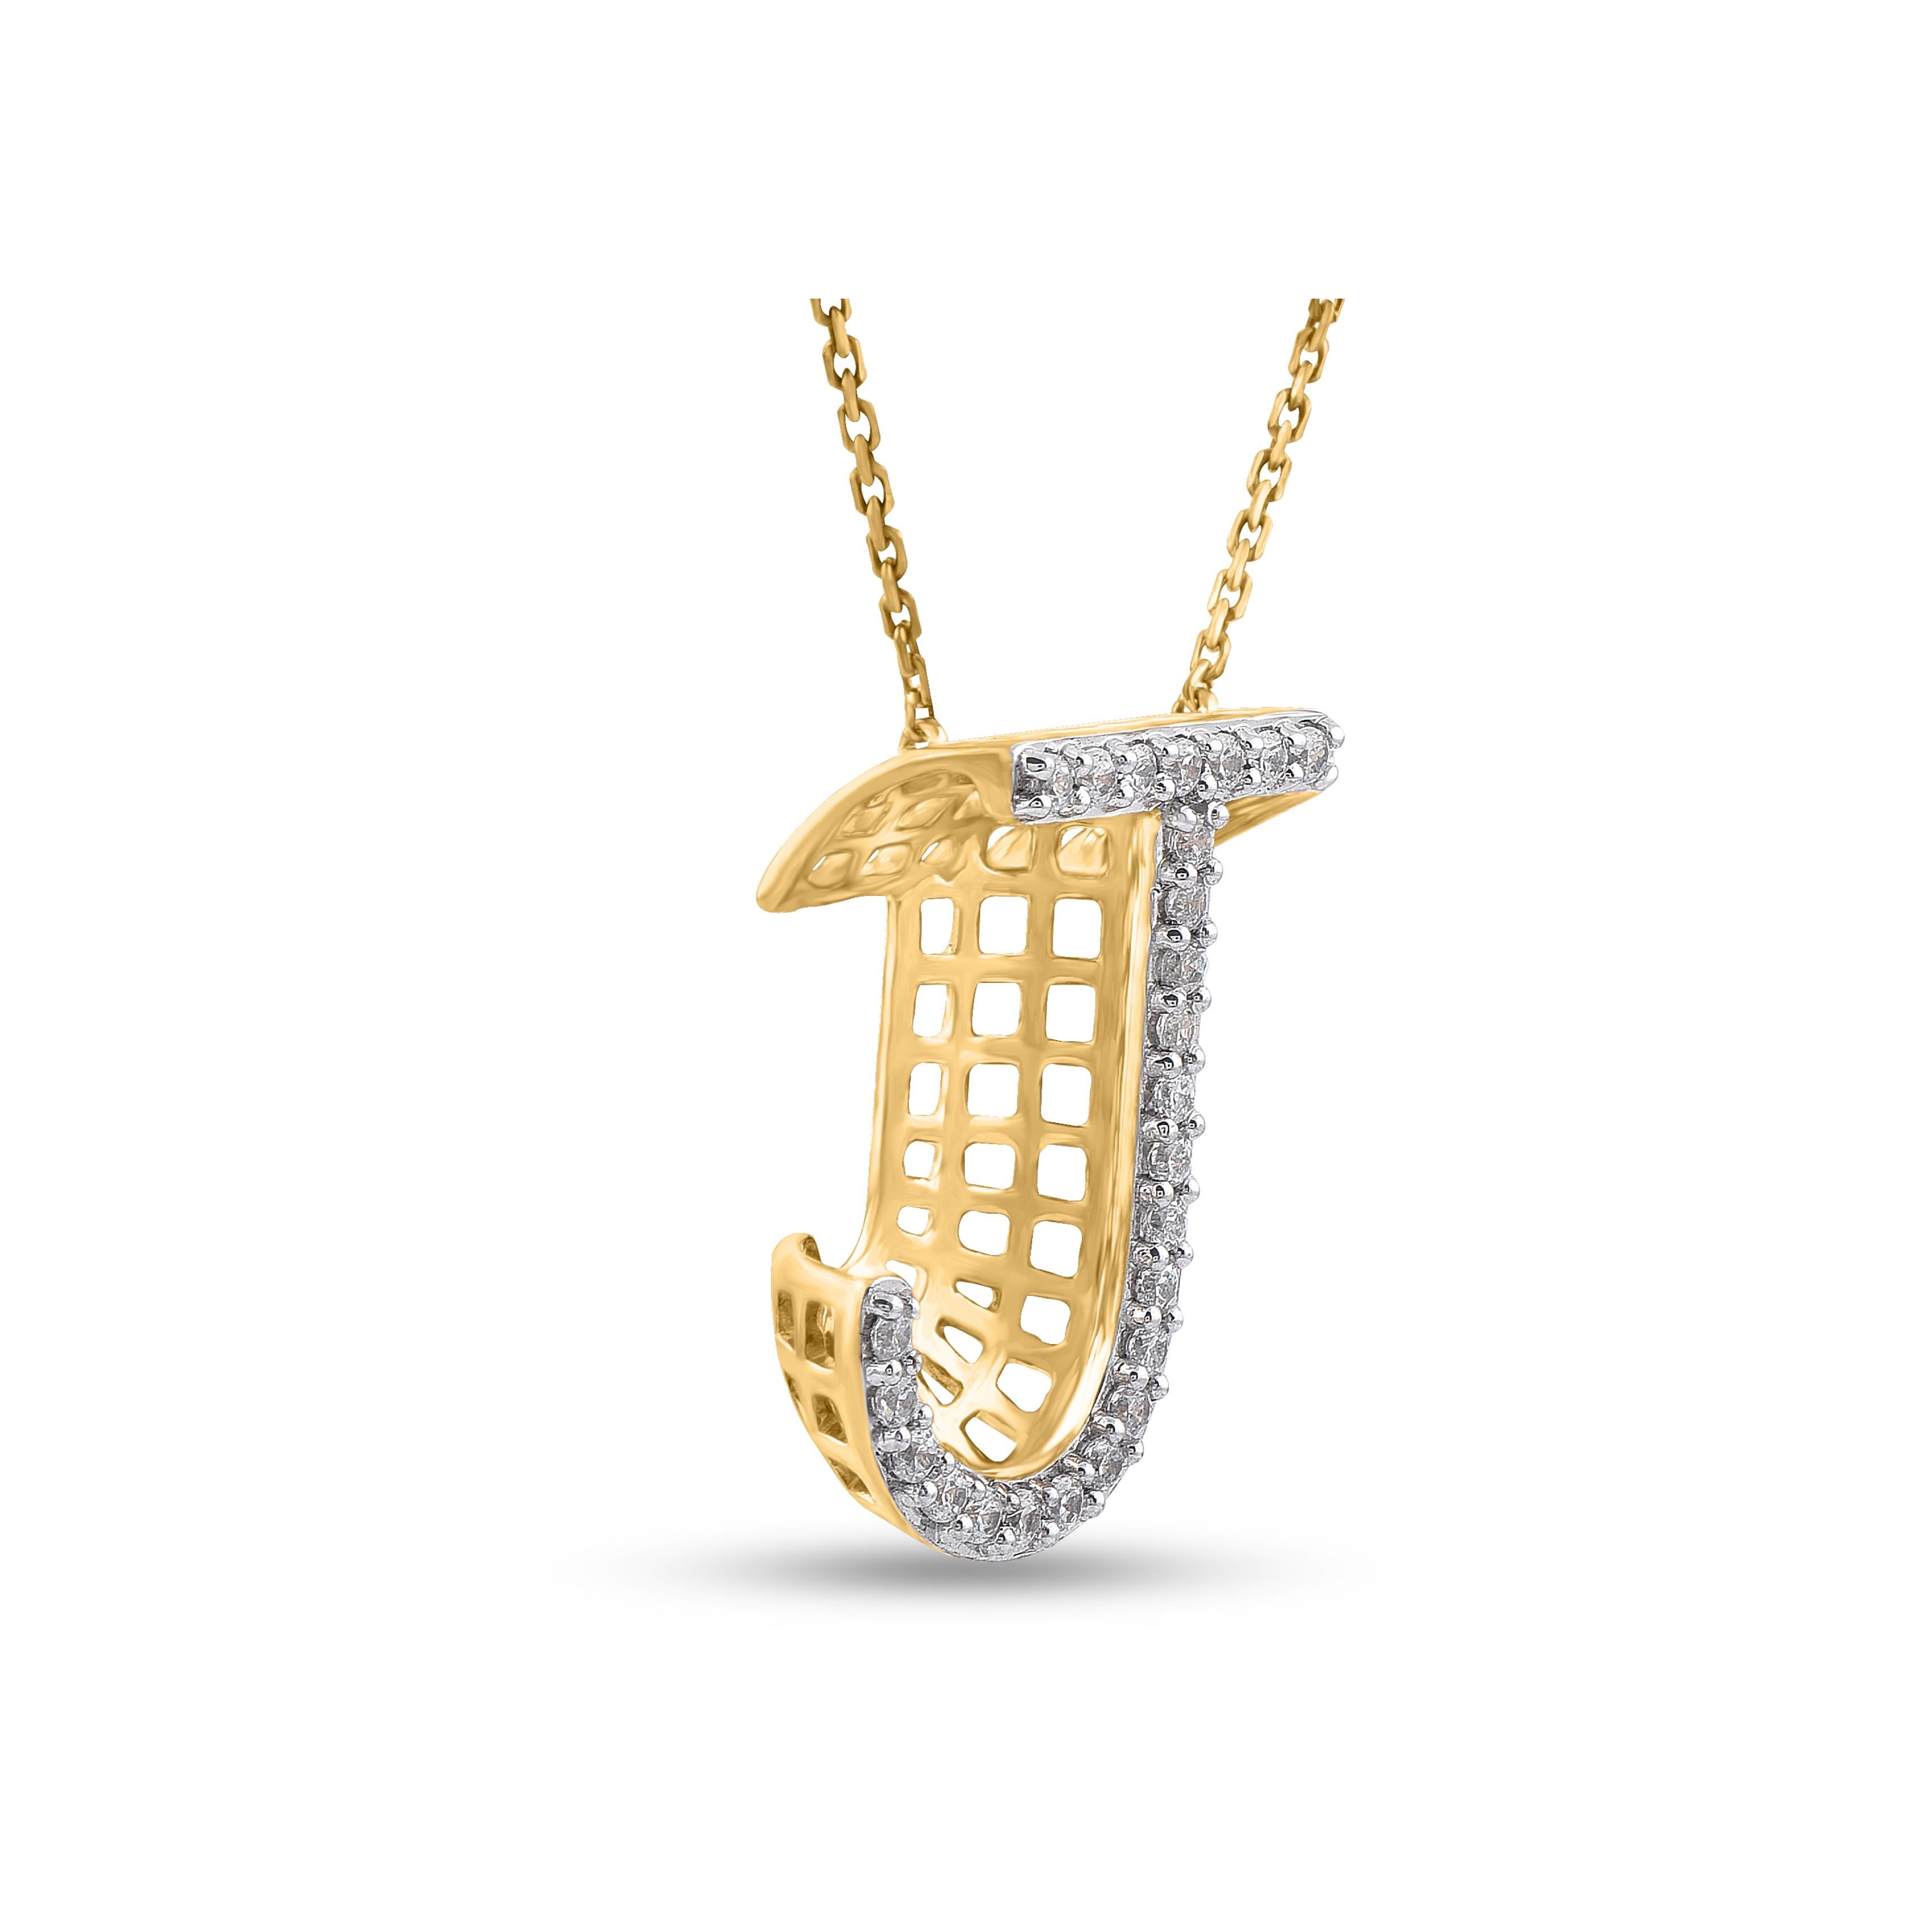 Diamond studded letter charm pendant is a piece of jewelry that is a favourite with everyone. Made by skilful craftsmen in 18 KT yellow gold and Studded with 25 hand-set round shaped natural white diamonds in prong setting and shine in H-I Color I1